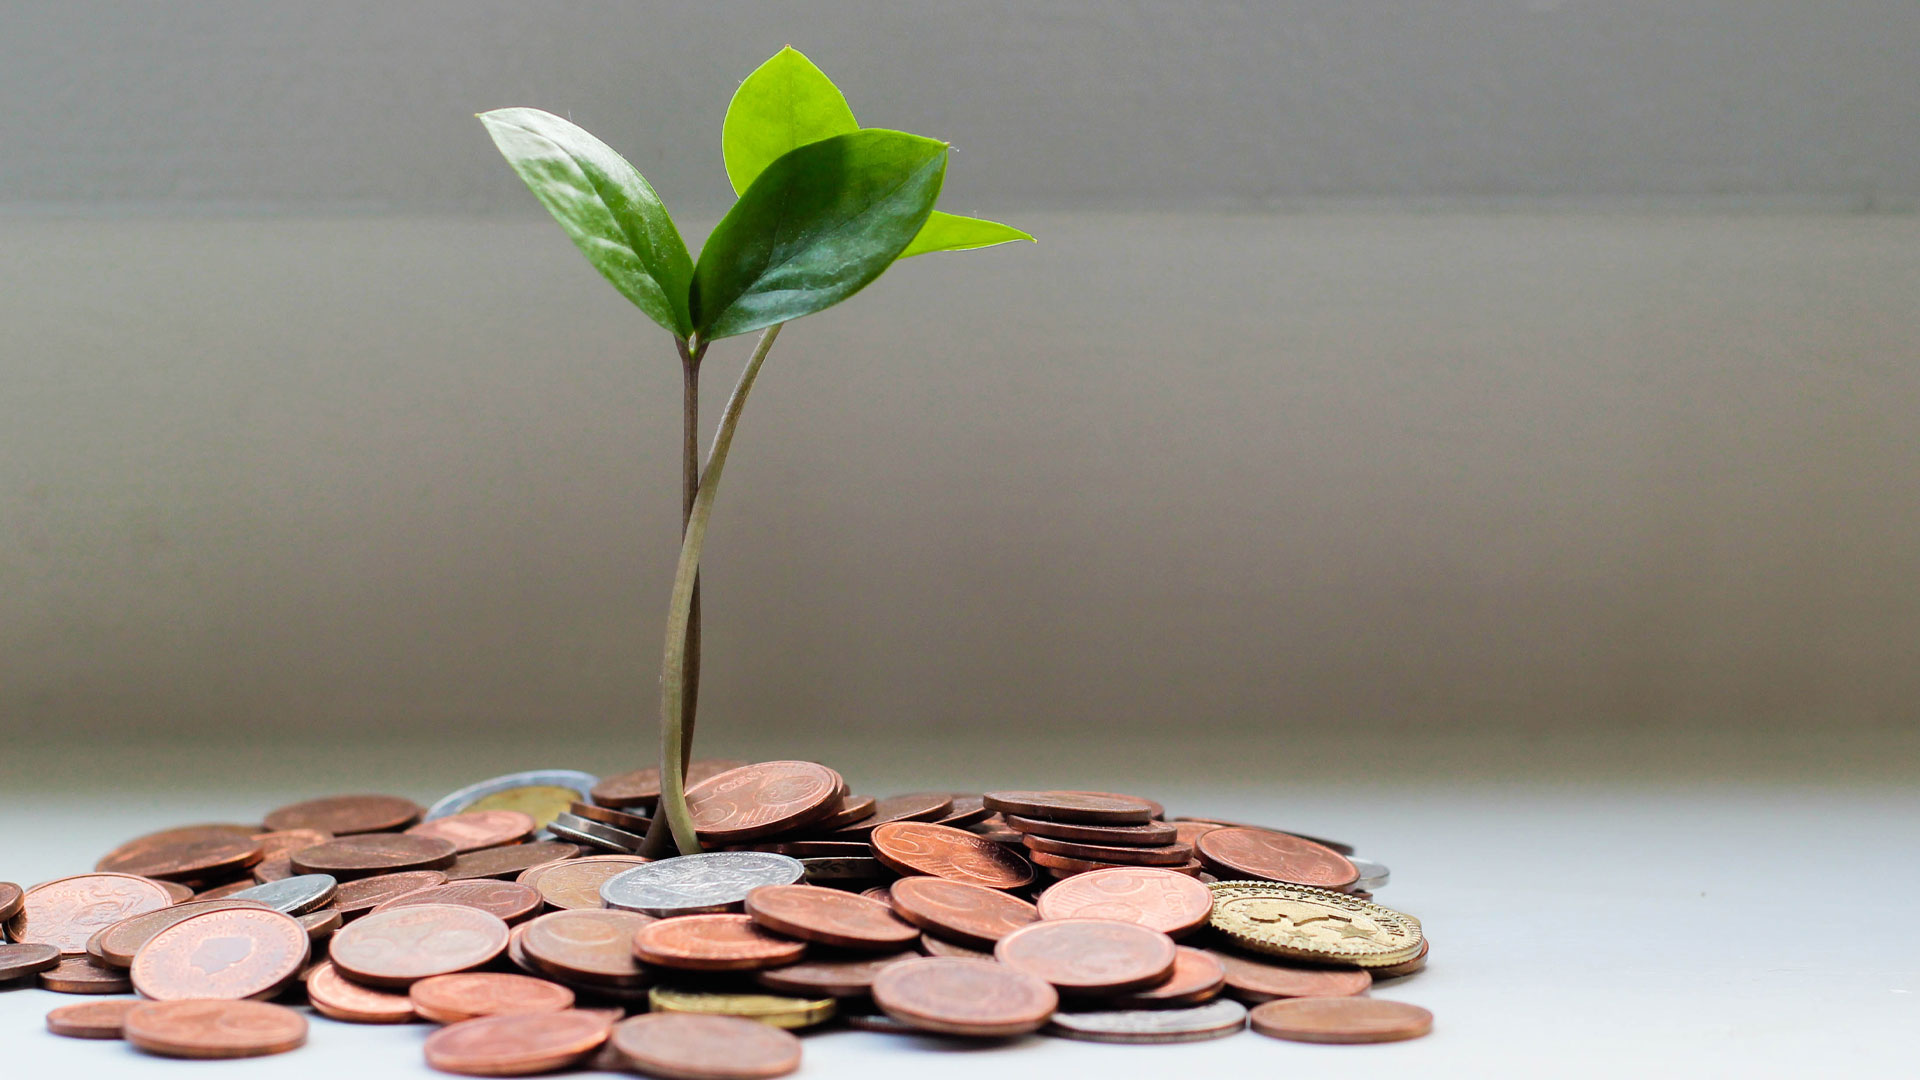 Green shoots of a plant growing out of a pile of coins.